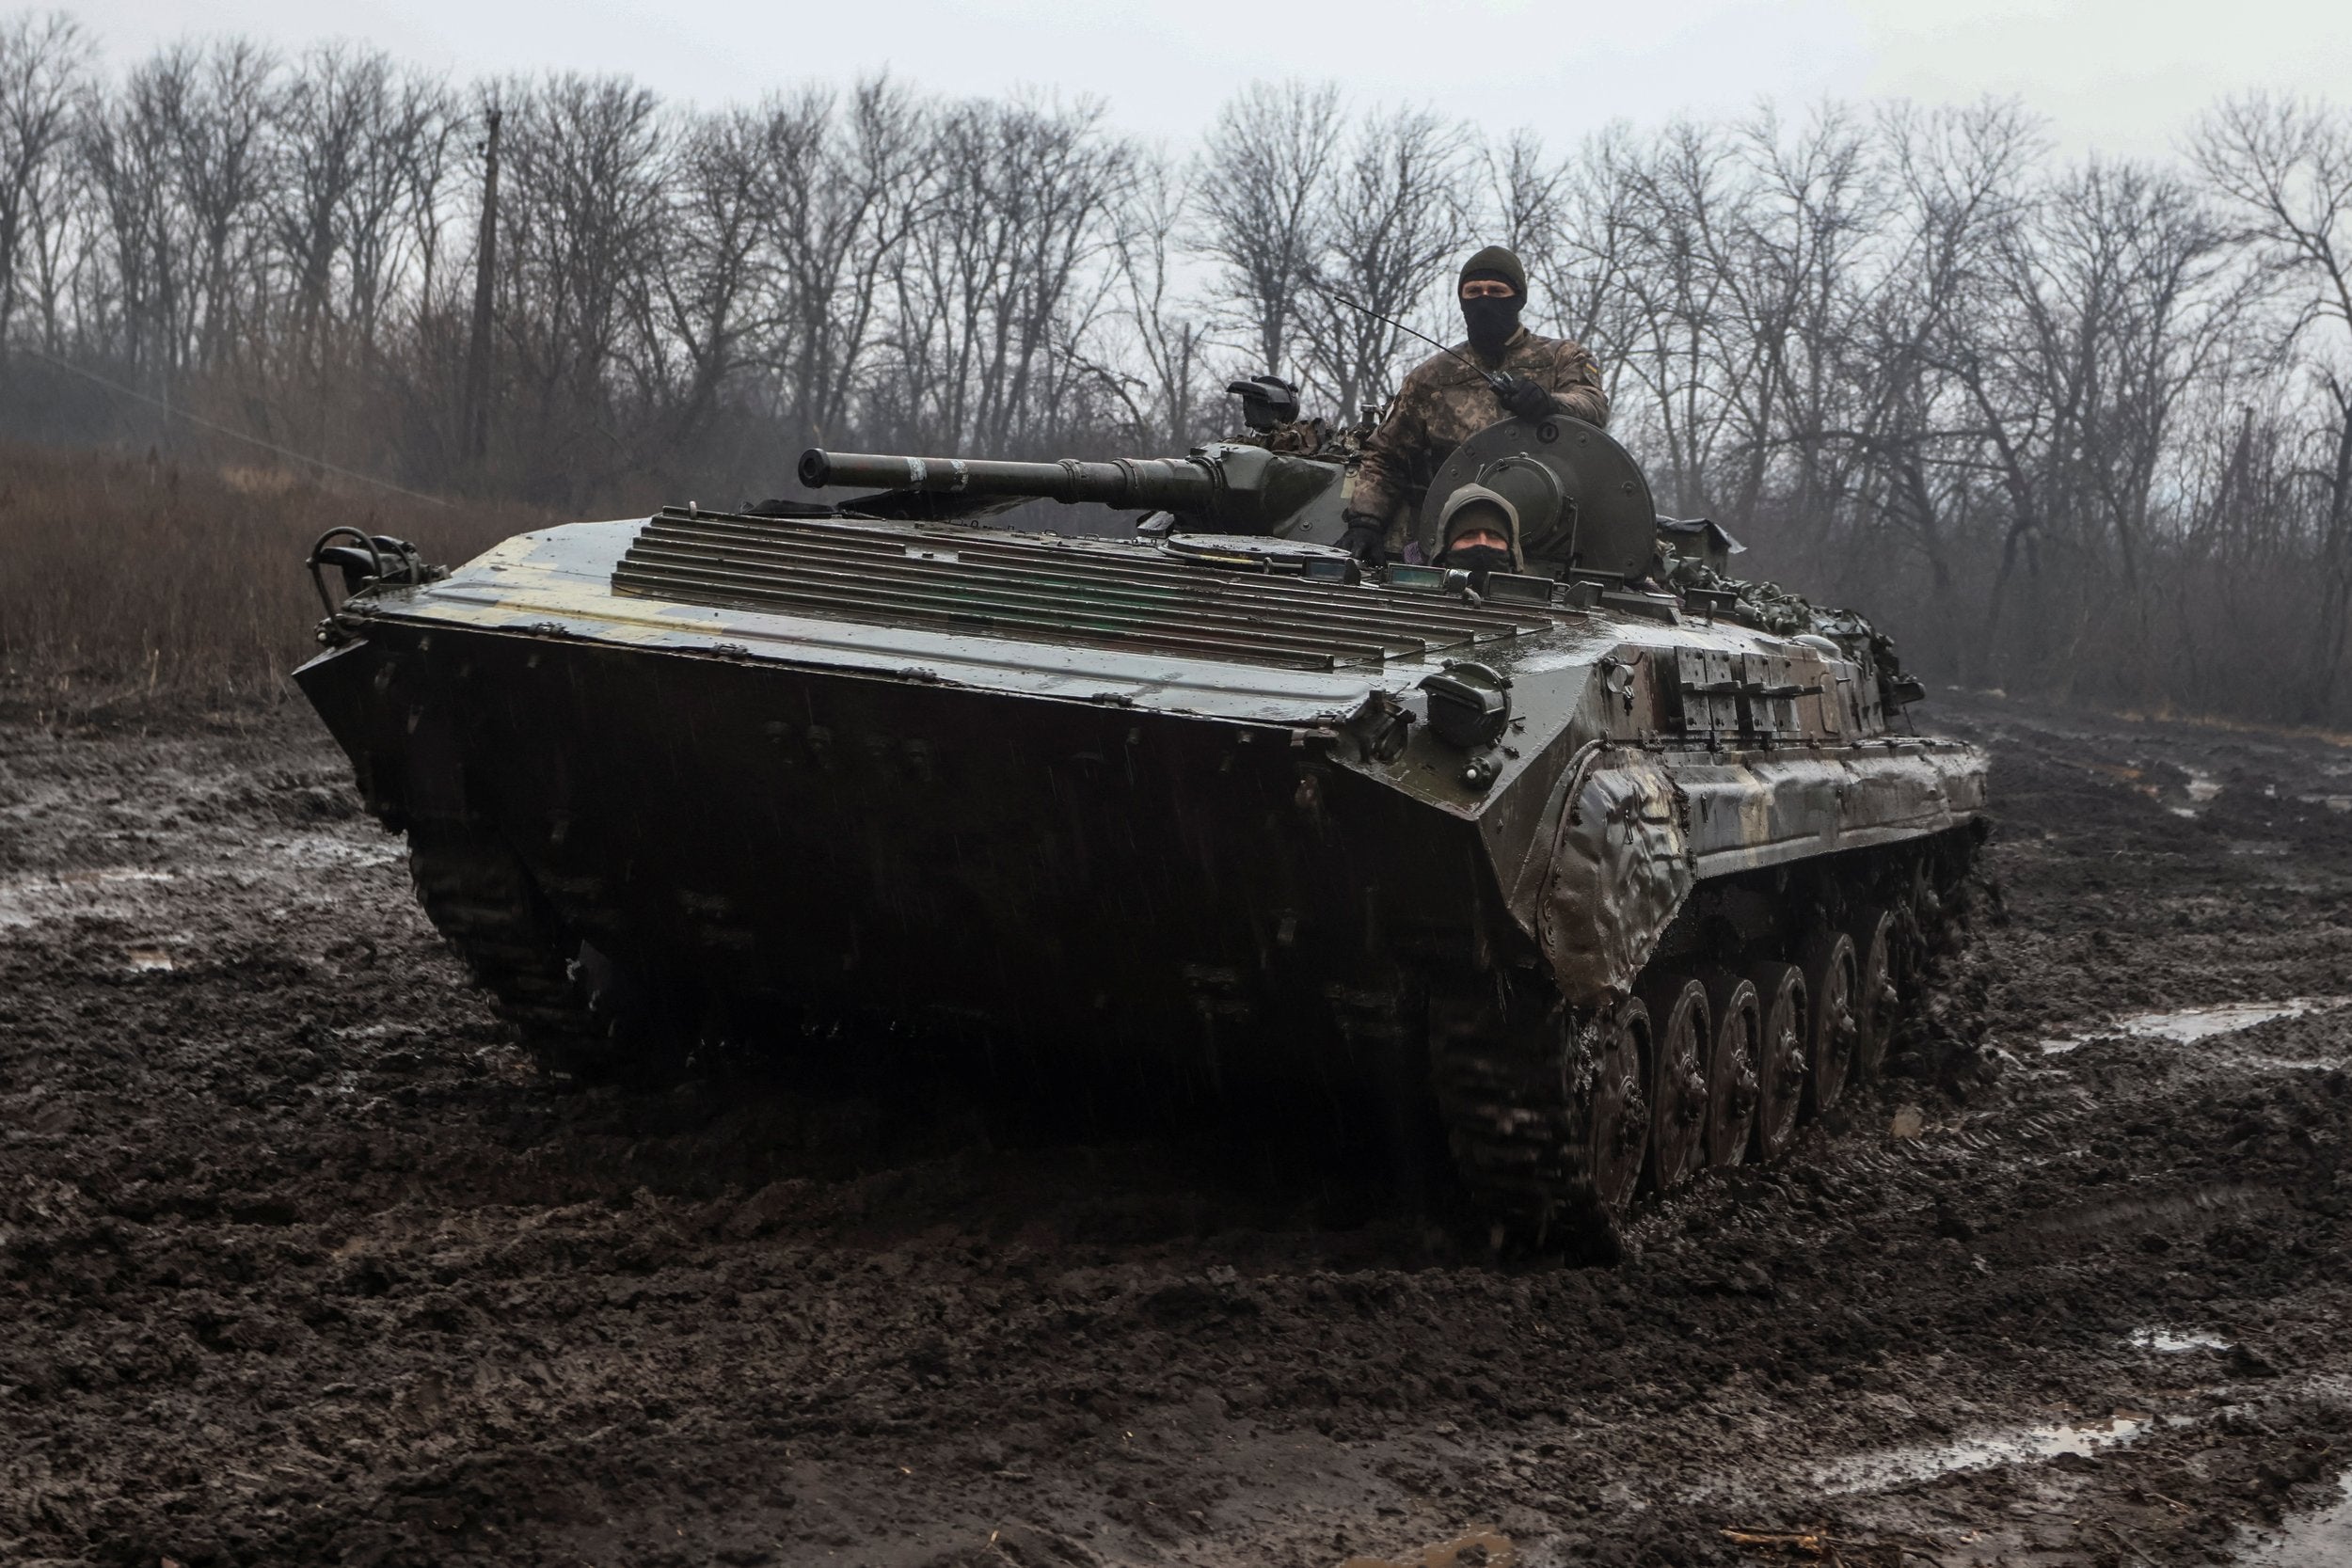 Russian forces on Tuesday pressed forward their weeks-long drive